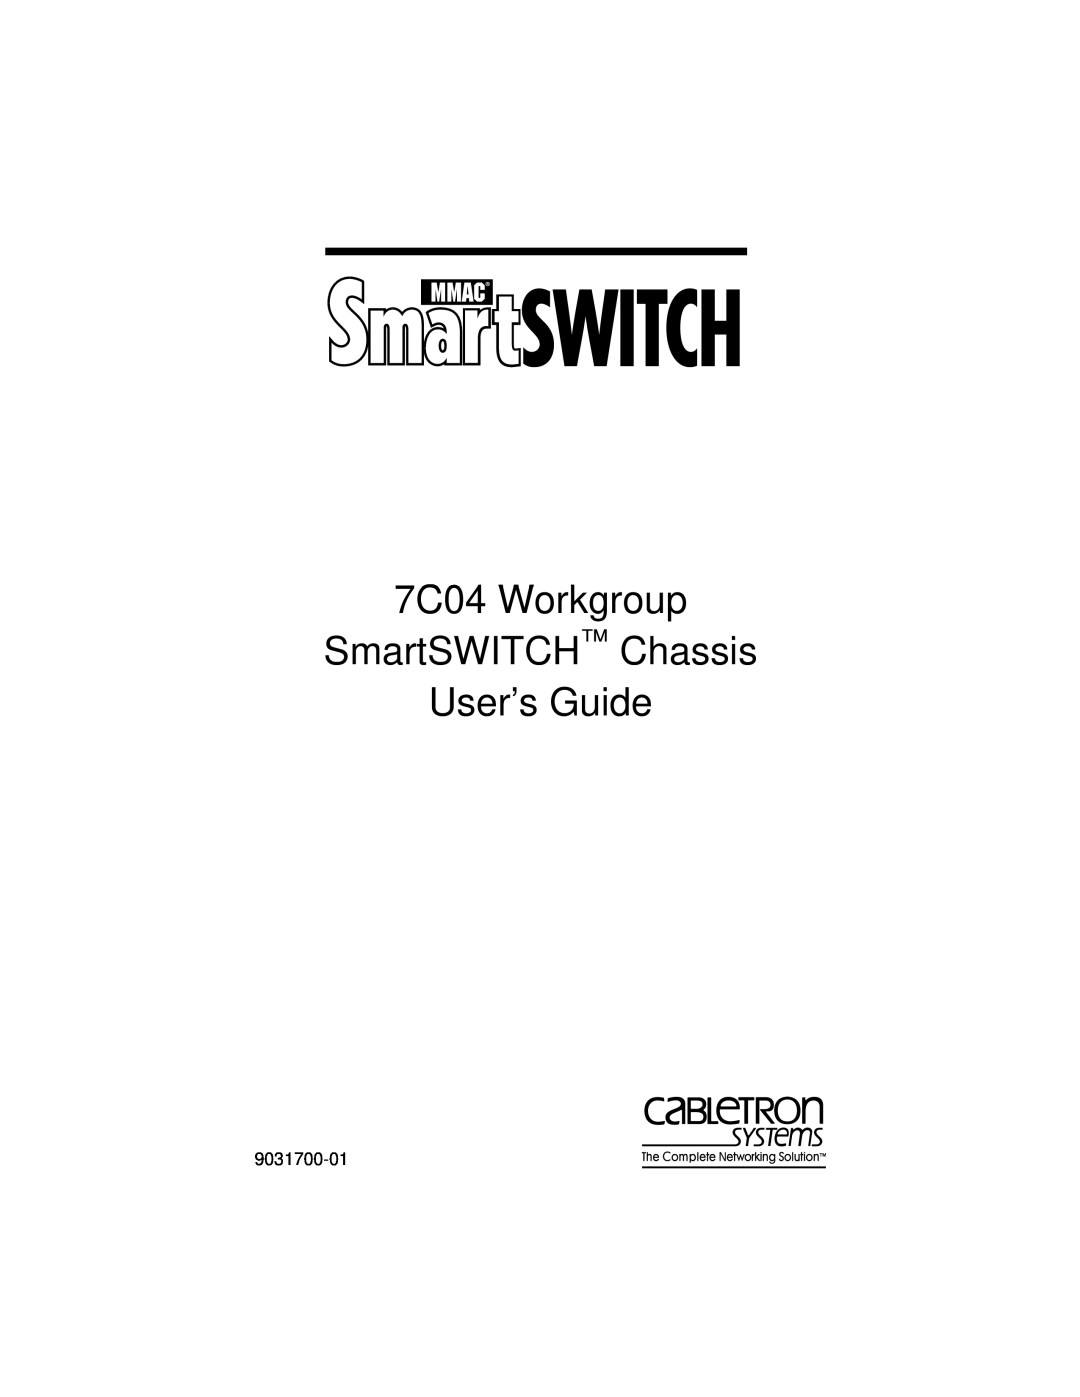 Cabletron Systems manual 7C04 Workgroup SmartSWITCH Chassis User’s Guide, 9031700-01 